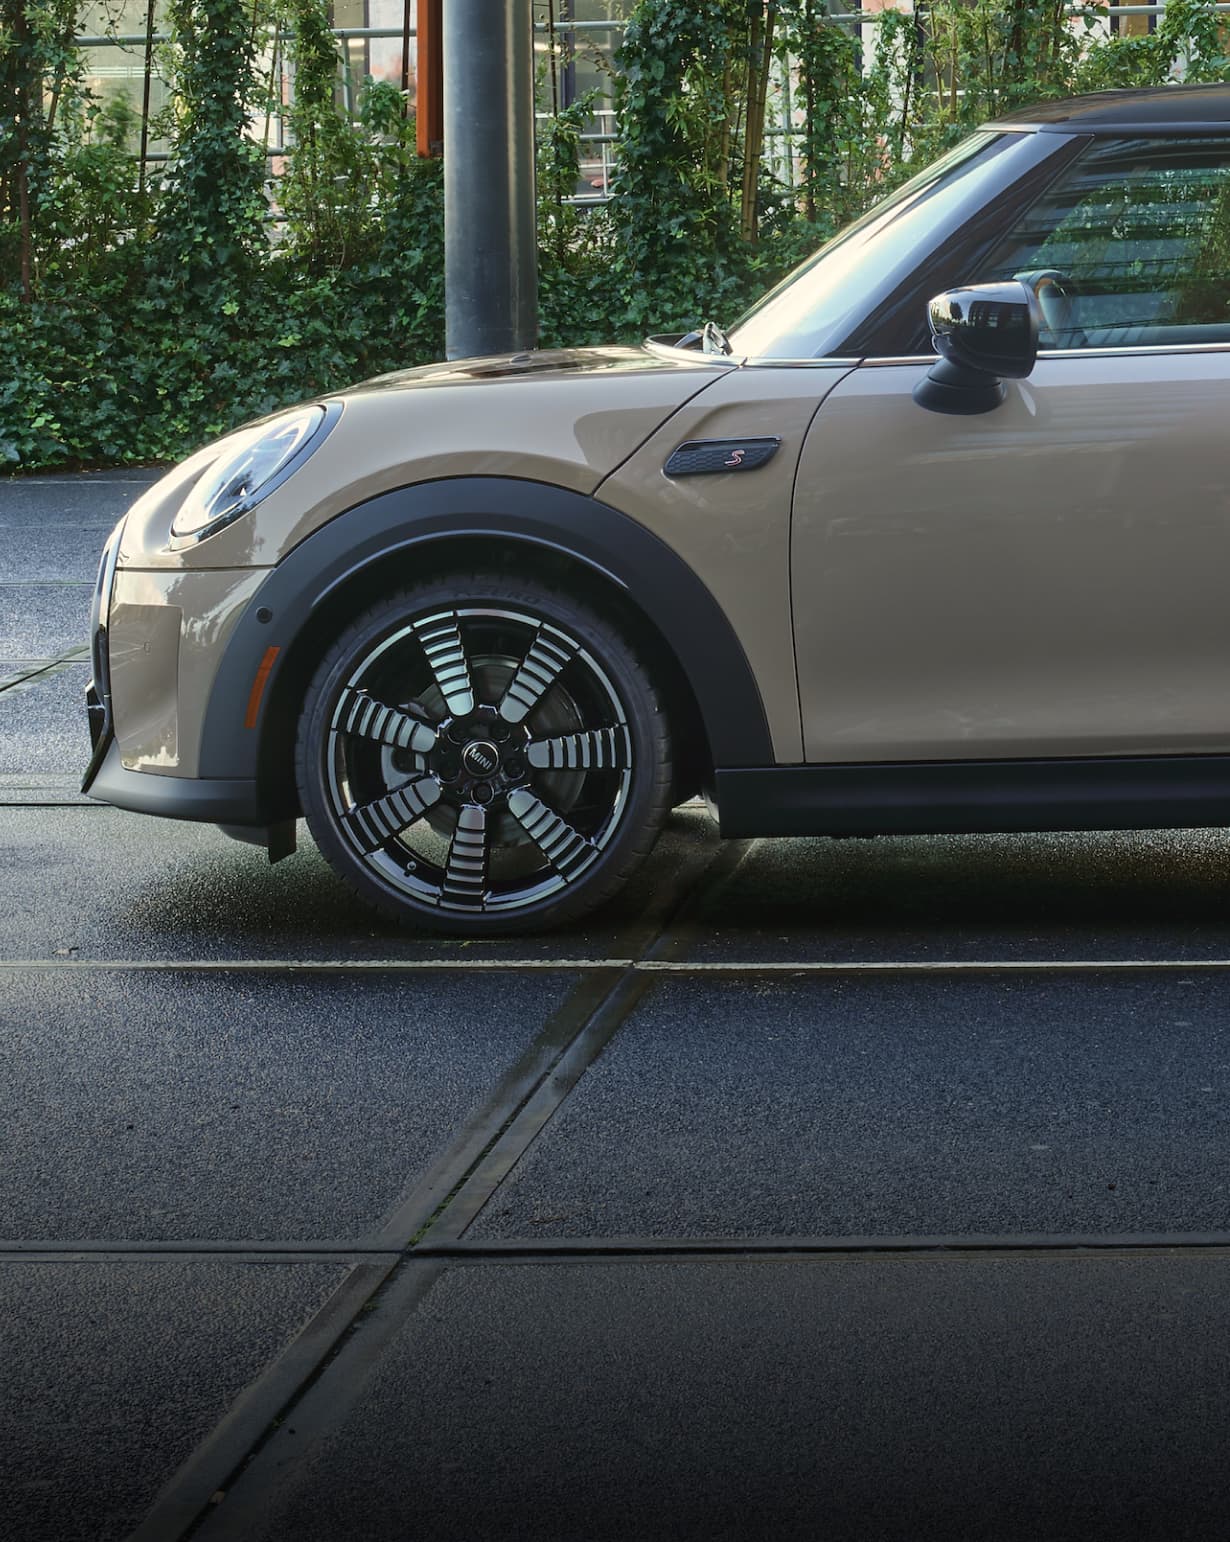 Side view of a grey MINI Hardtop 2 Door’s front-left wheel on a street surface with trees in the background.